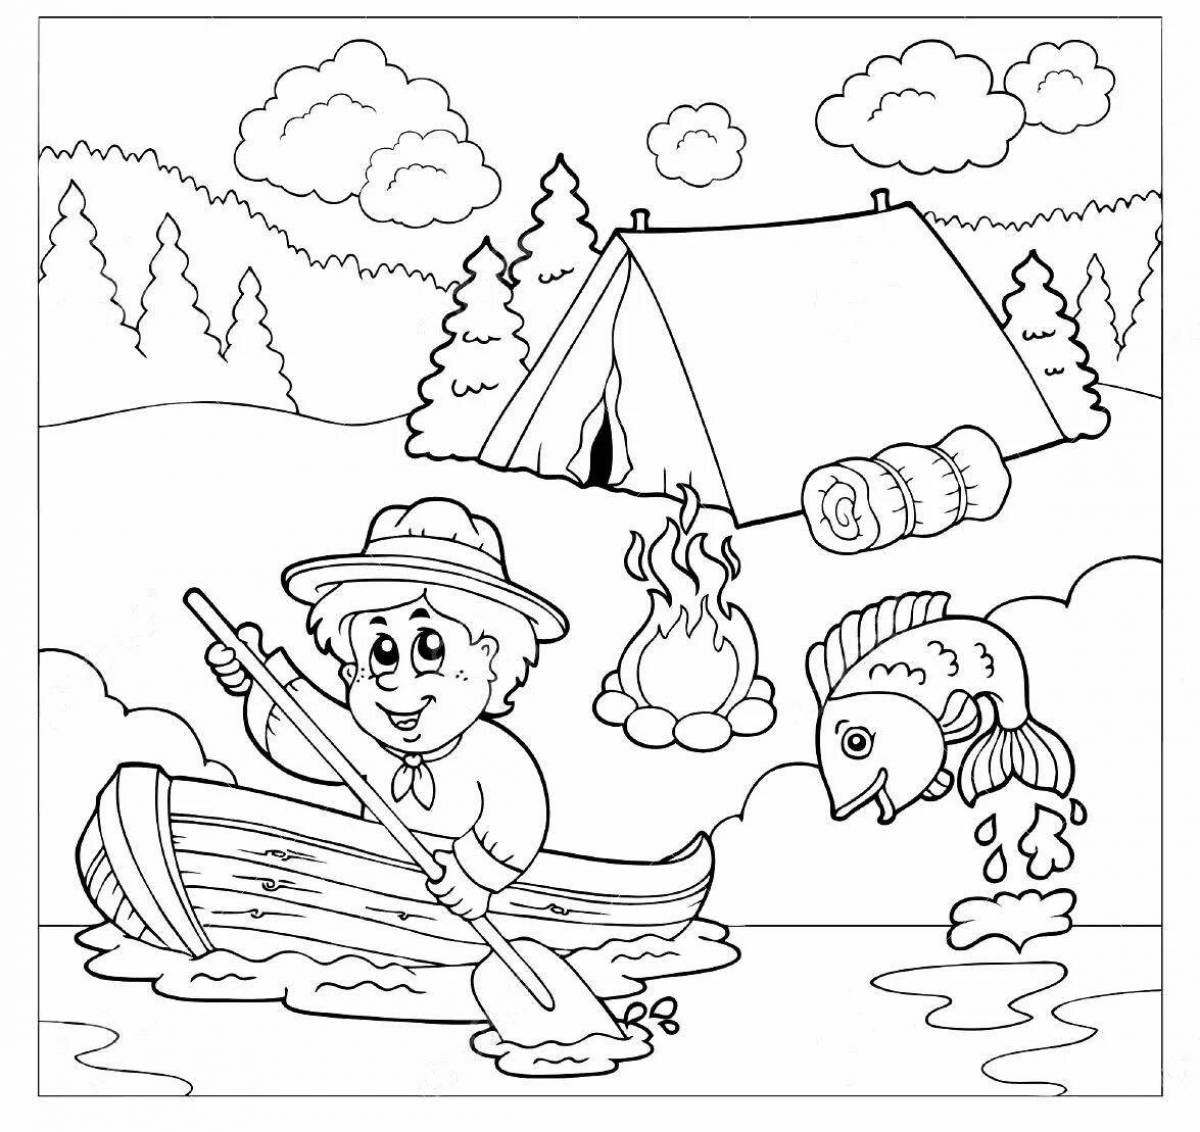 Amazing summer coloring book